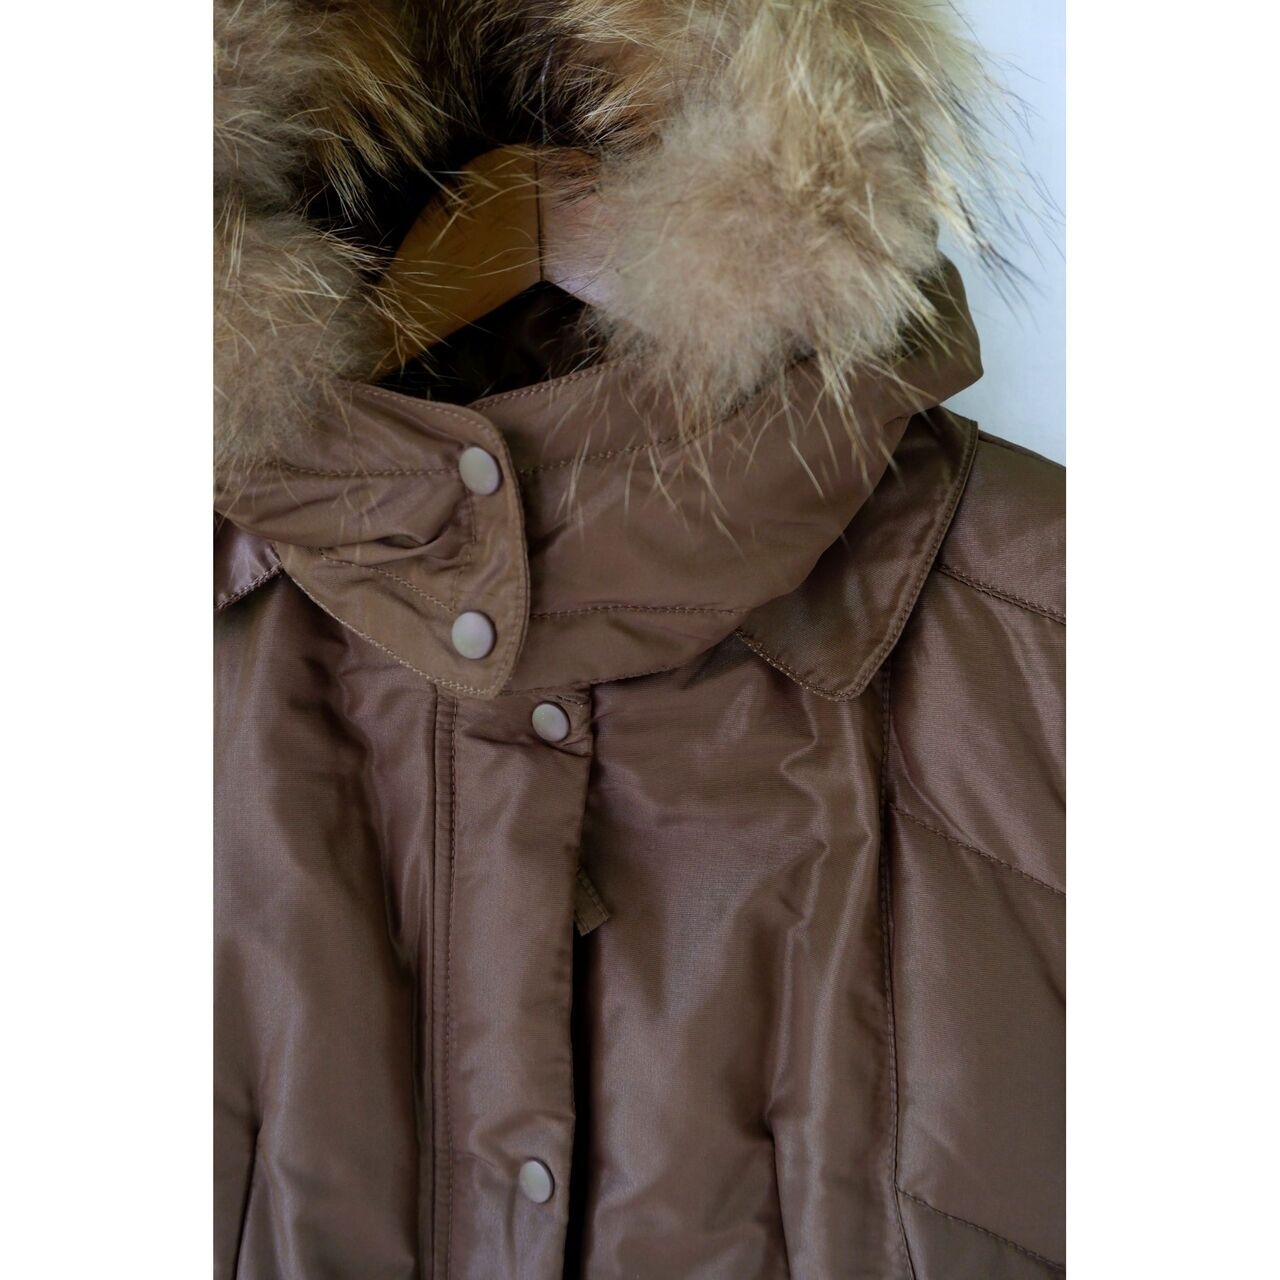 Bcbg Timeless Tradition Brown Geometric Puffy Coat